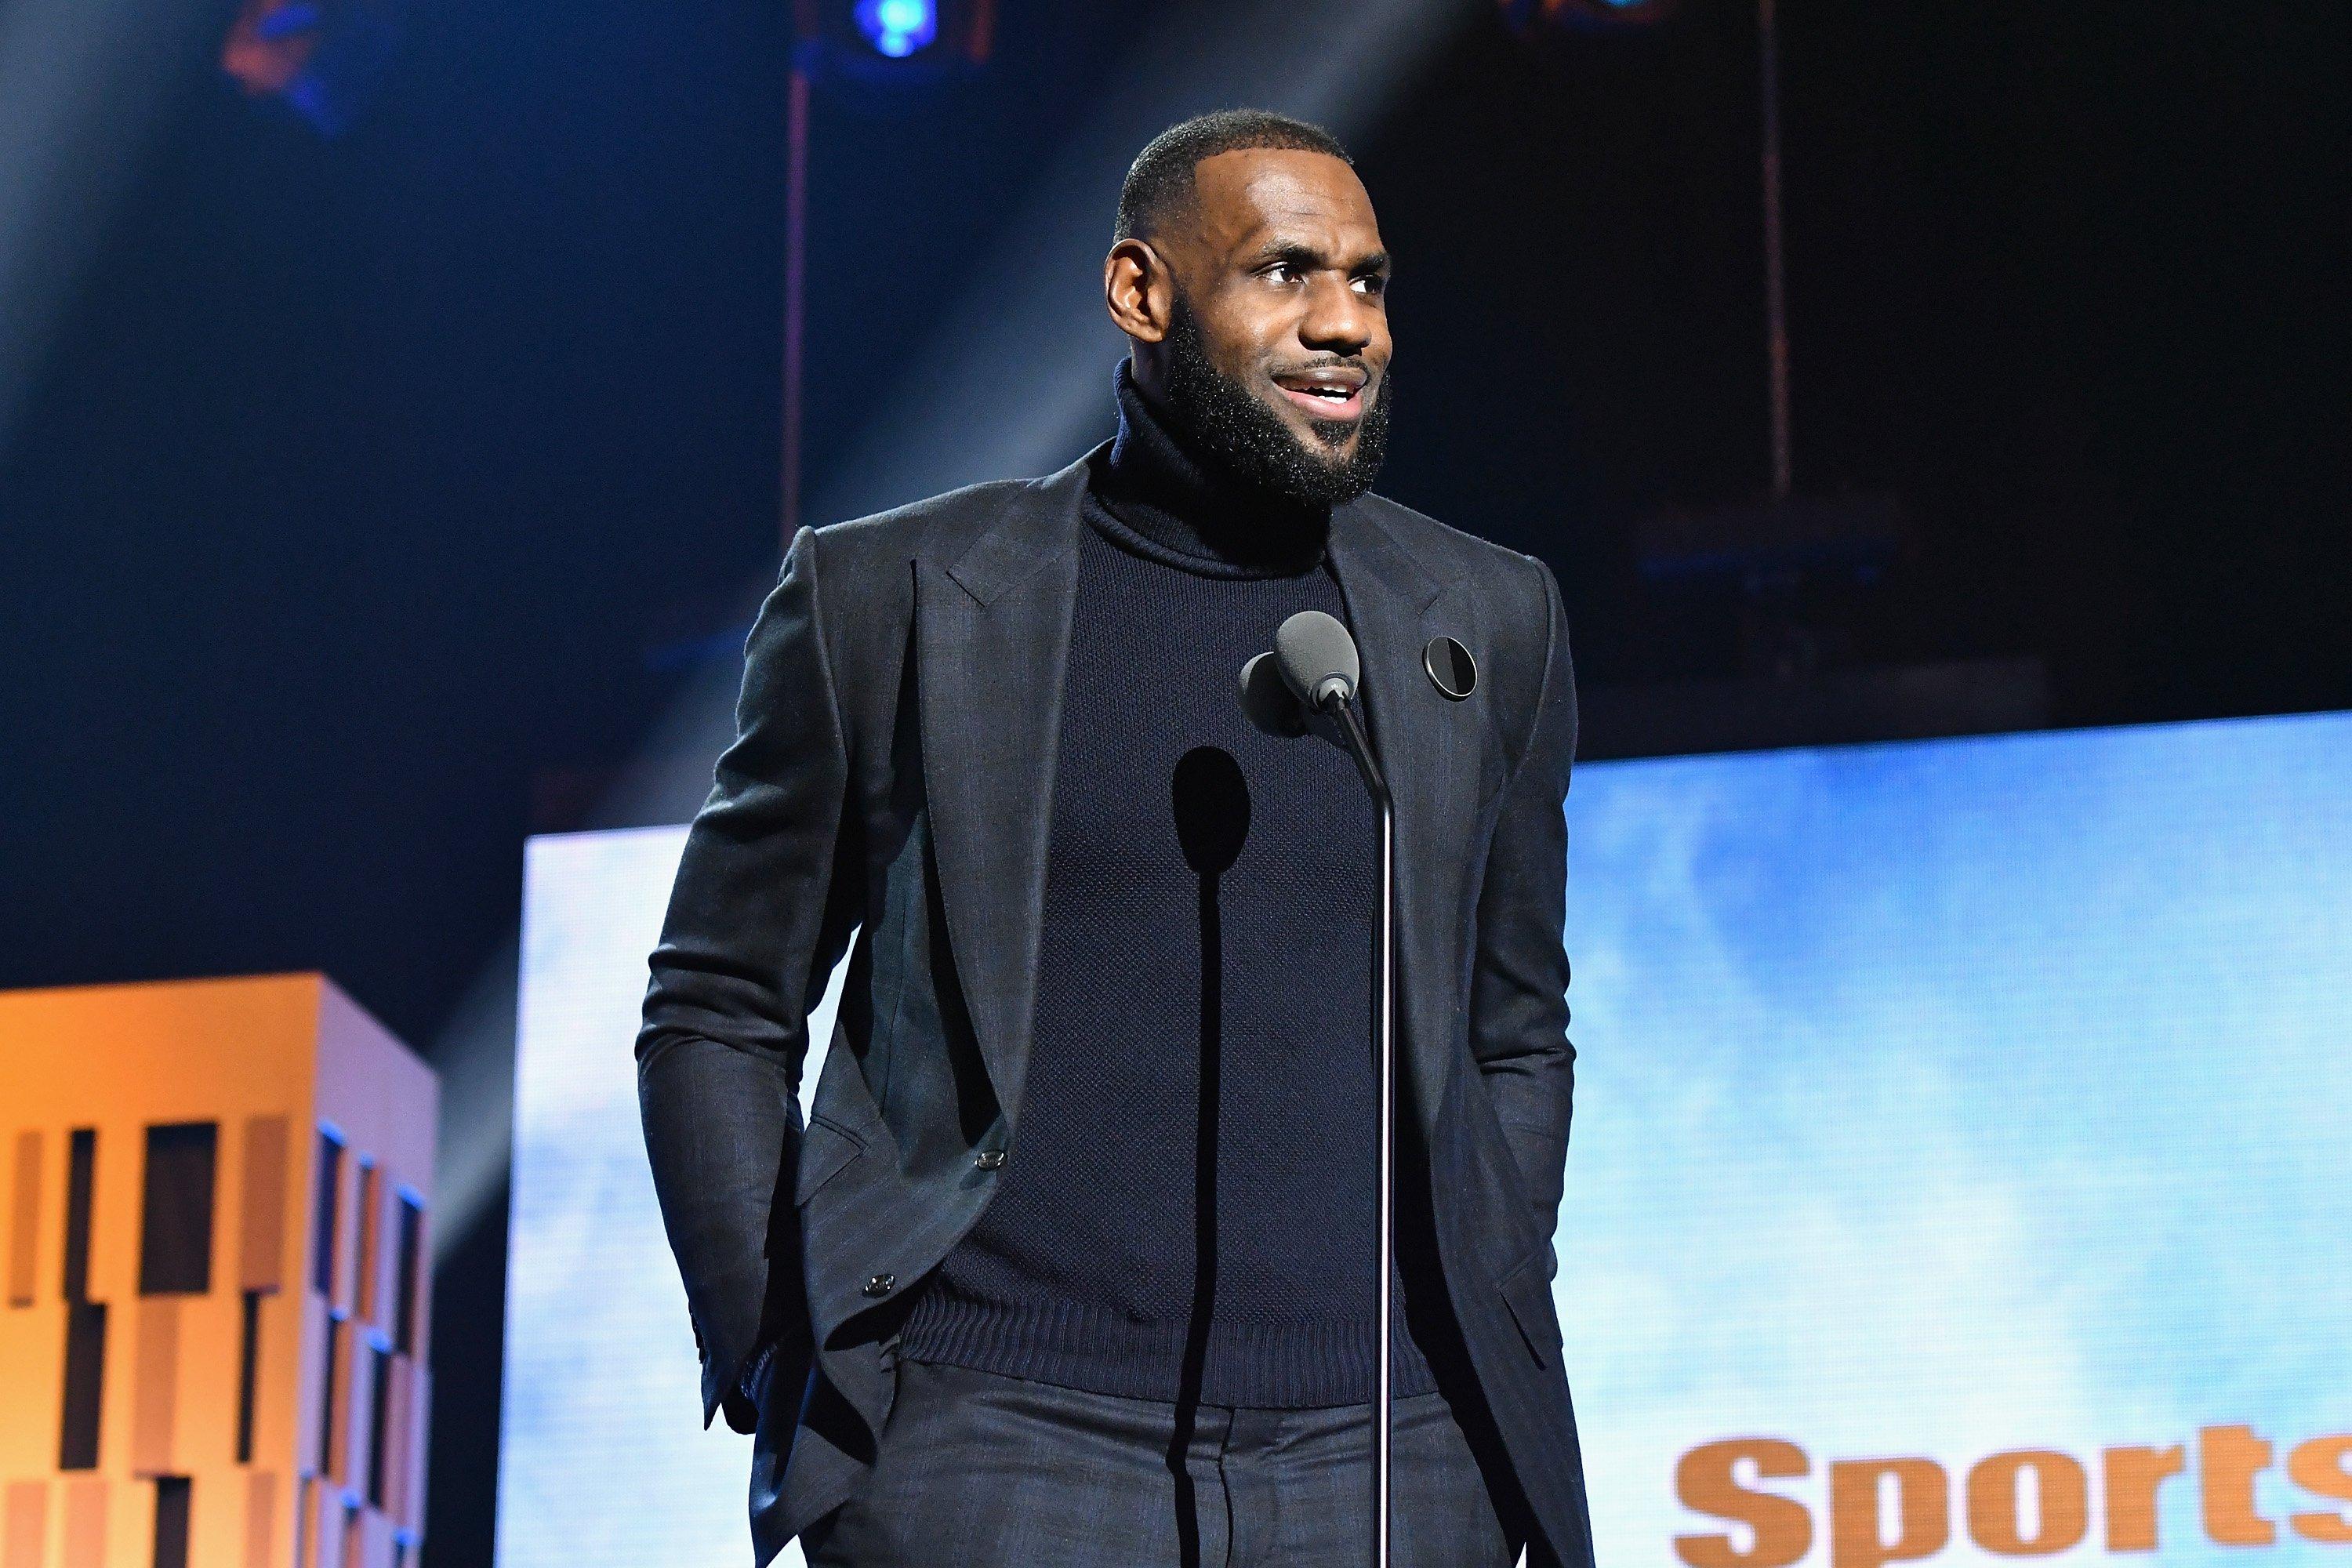 LeBron James speaks at a ceremony in 2016